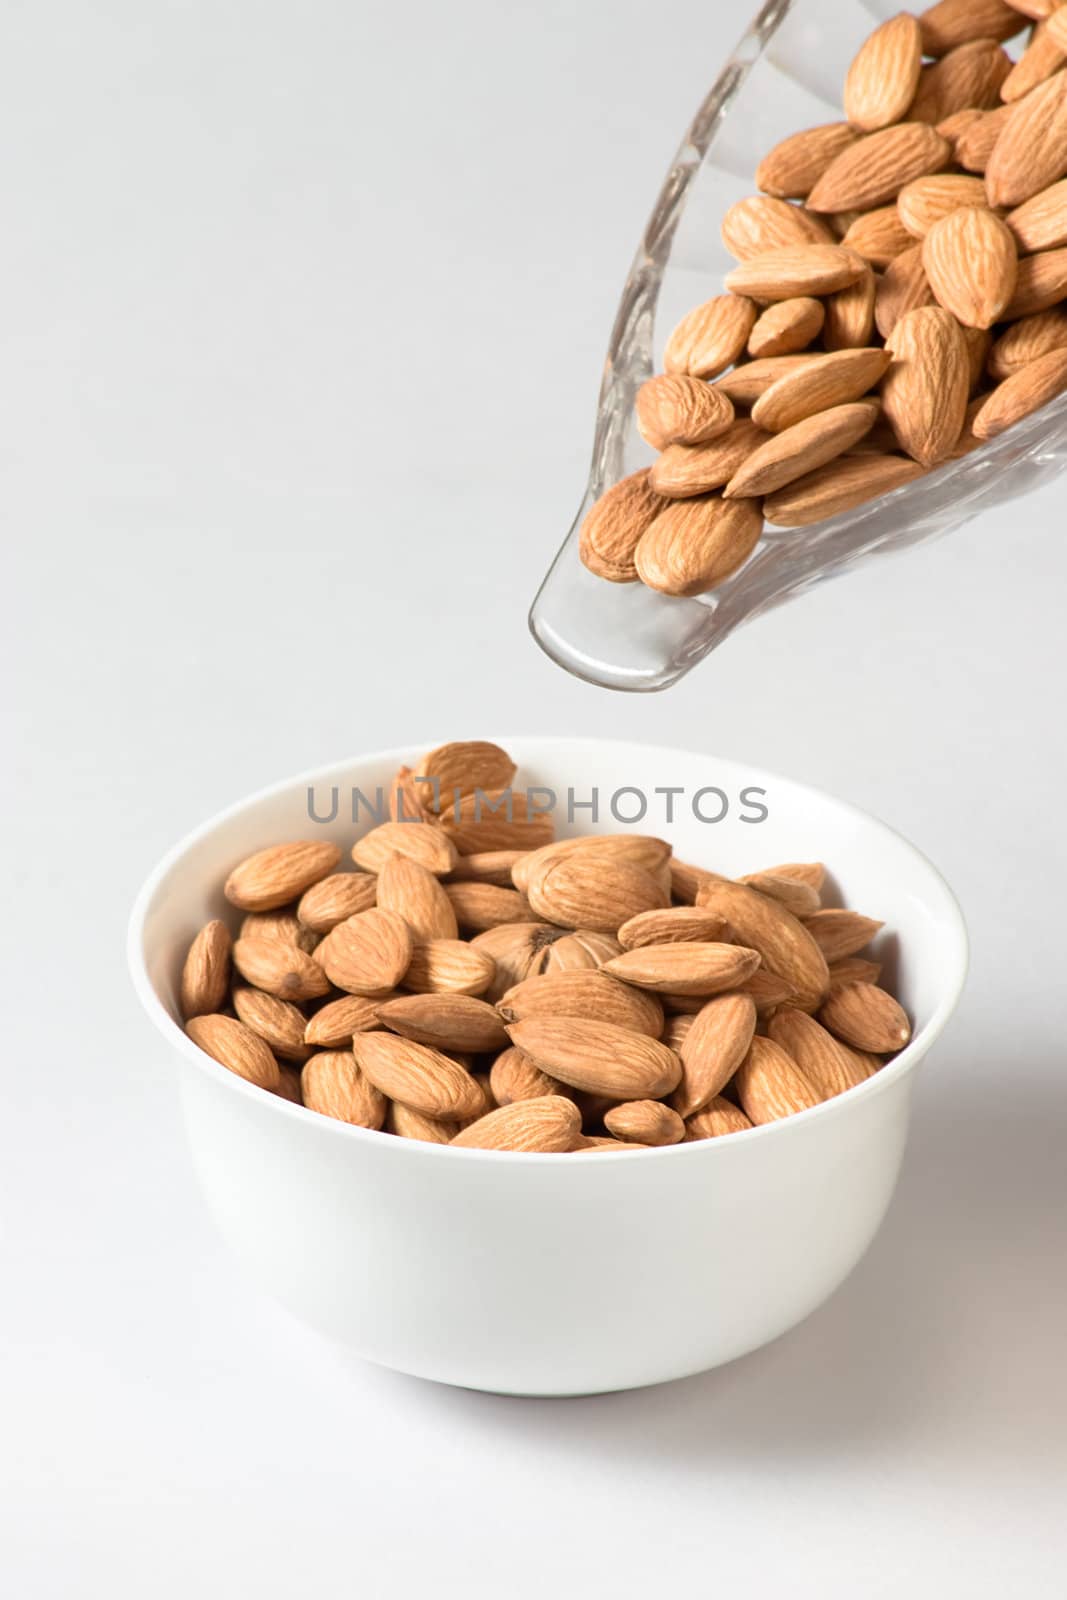 The group of almond against white background